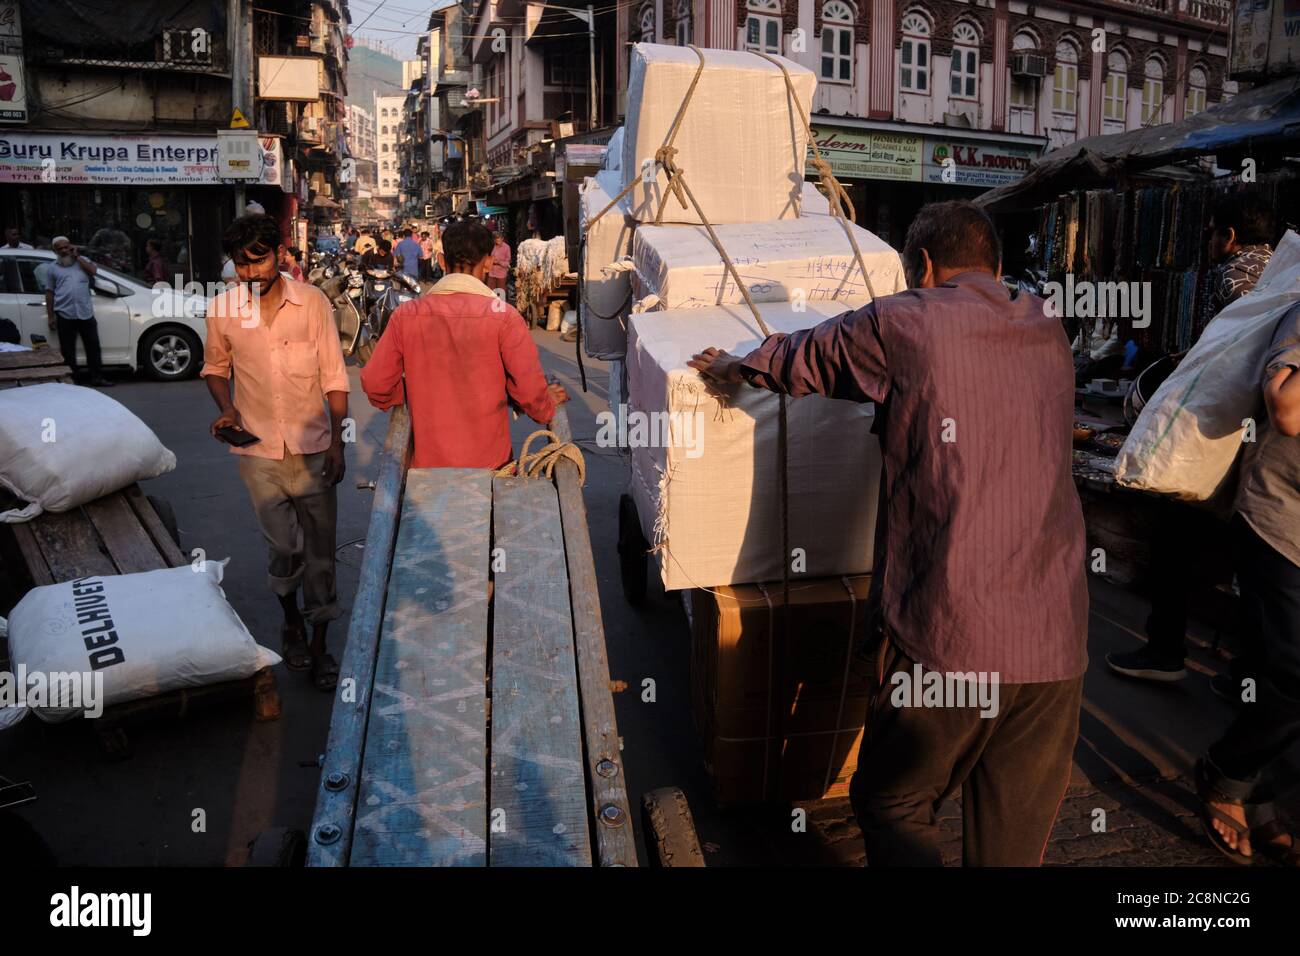 Men pull or pus handcarts through busy Kalbadevi Rd. in Bhuleshwar, Mumbai, India, handcarts being the most used mode for goods transport in the area Stock Photo